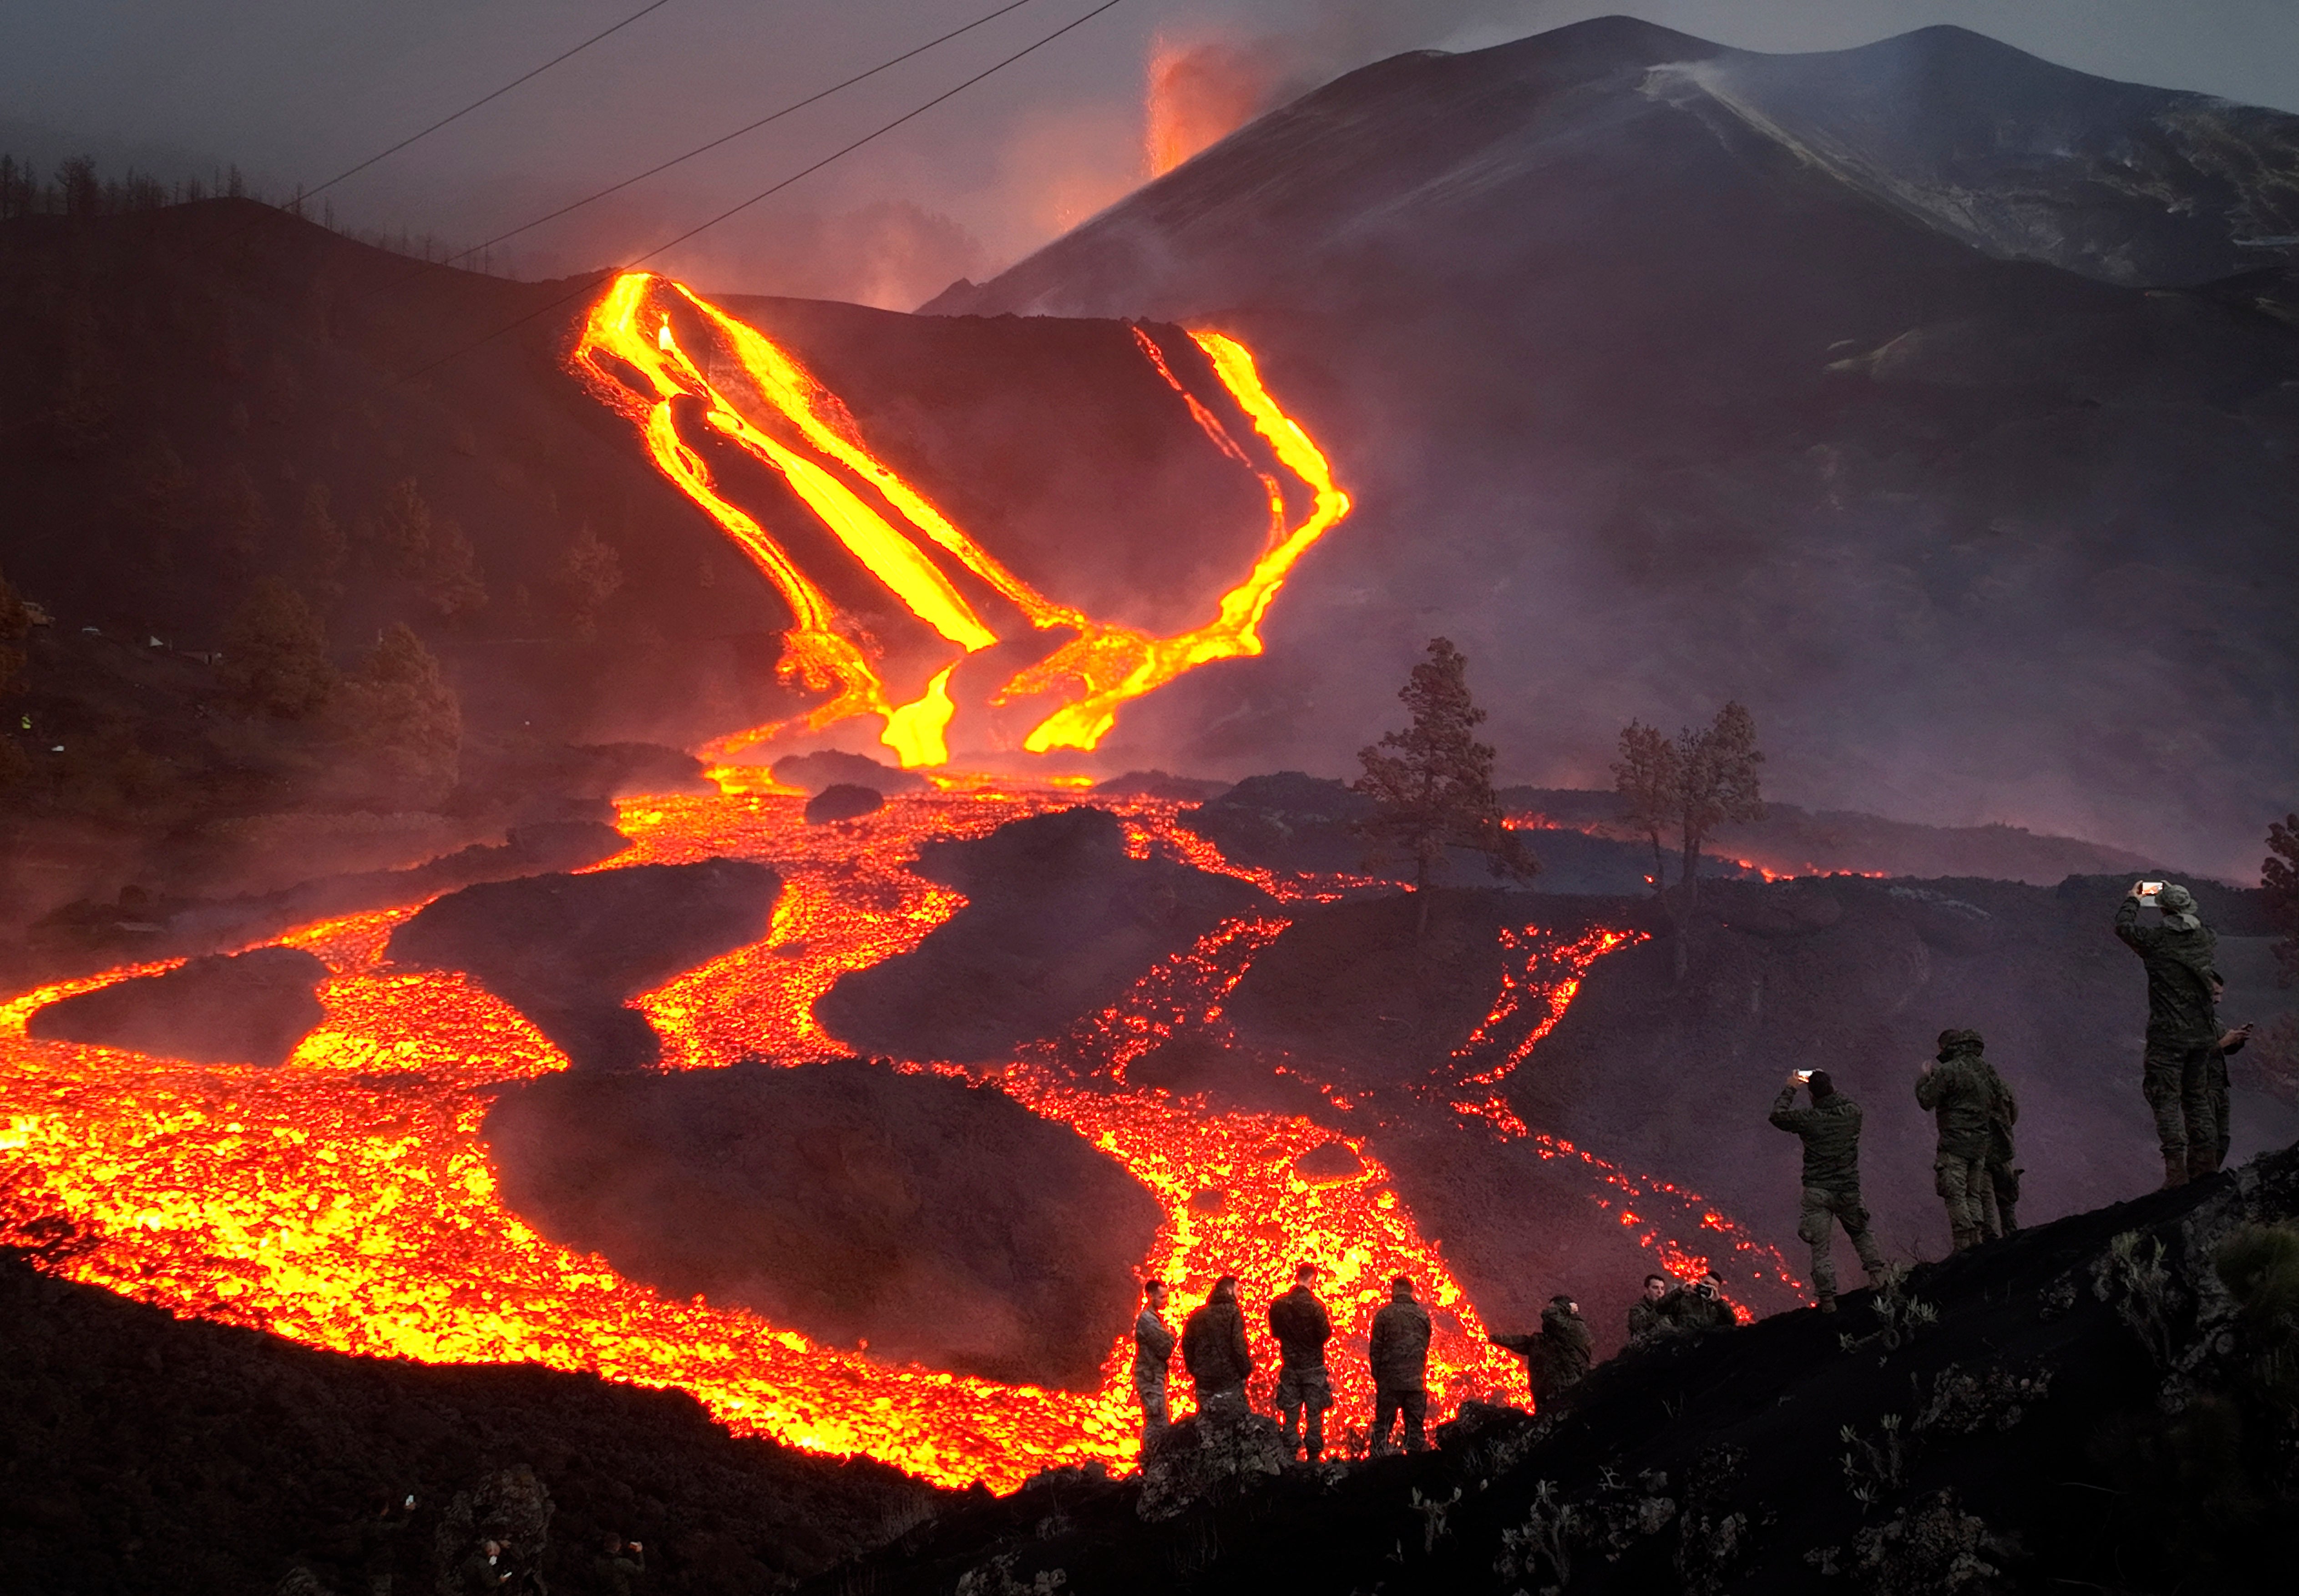 Spanish Army soldiers stand on a hill as lava flows on the Canary island of La Palma in November